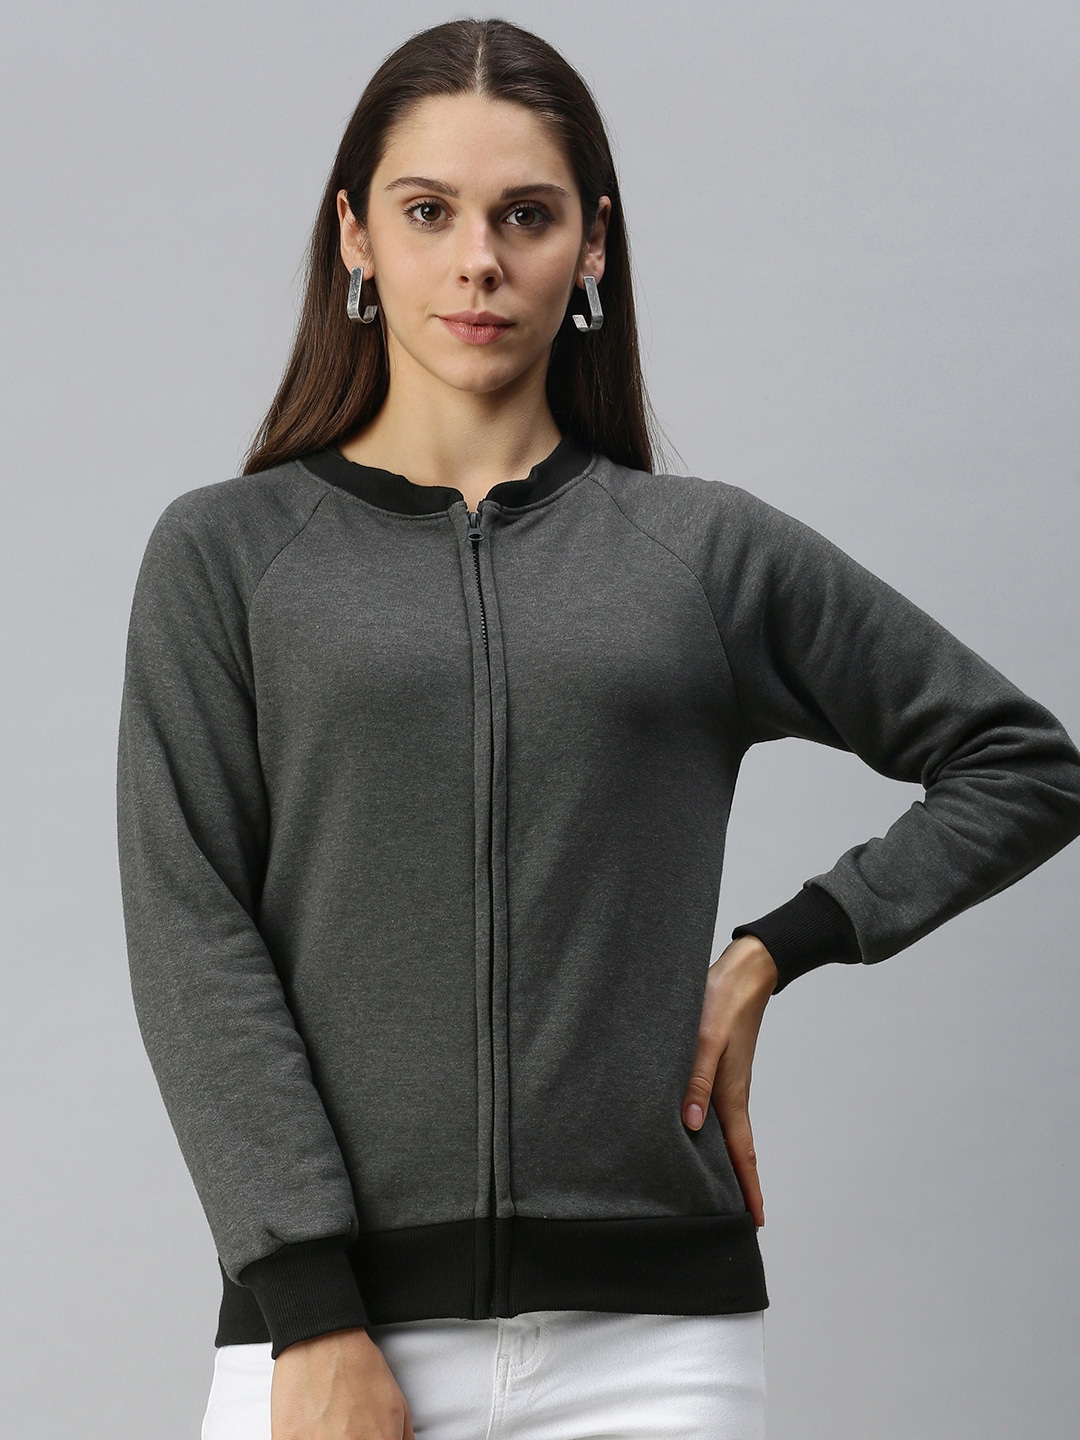 Campus Sutra Women Charcoal Grey Solid Front-Open Sweatshirt Price in India